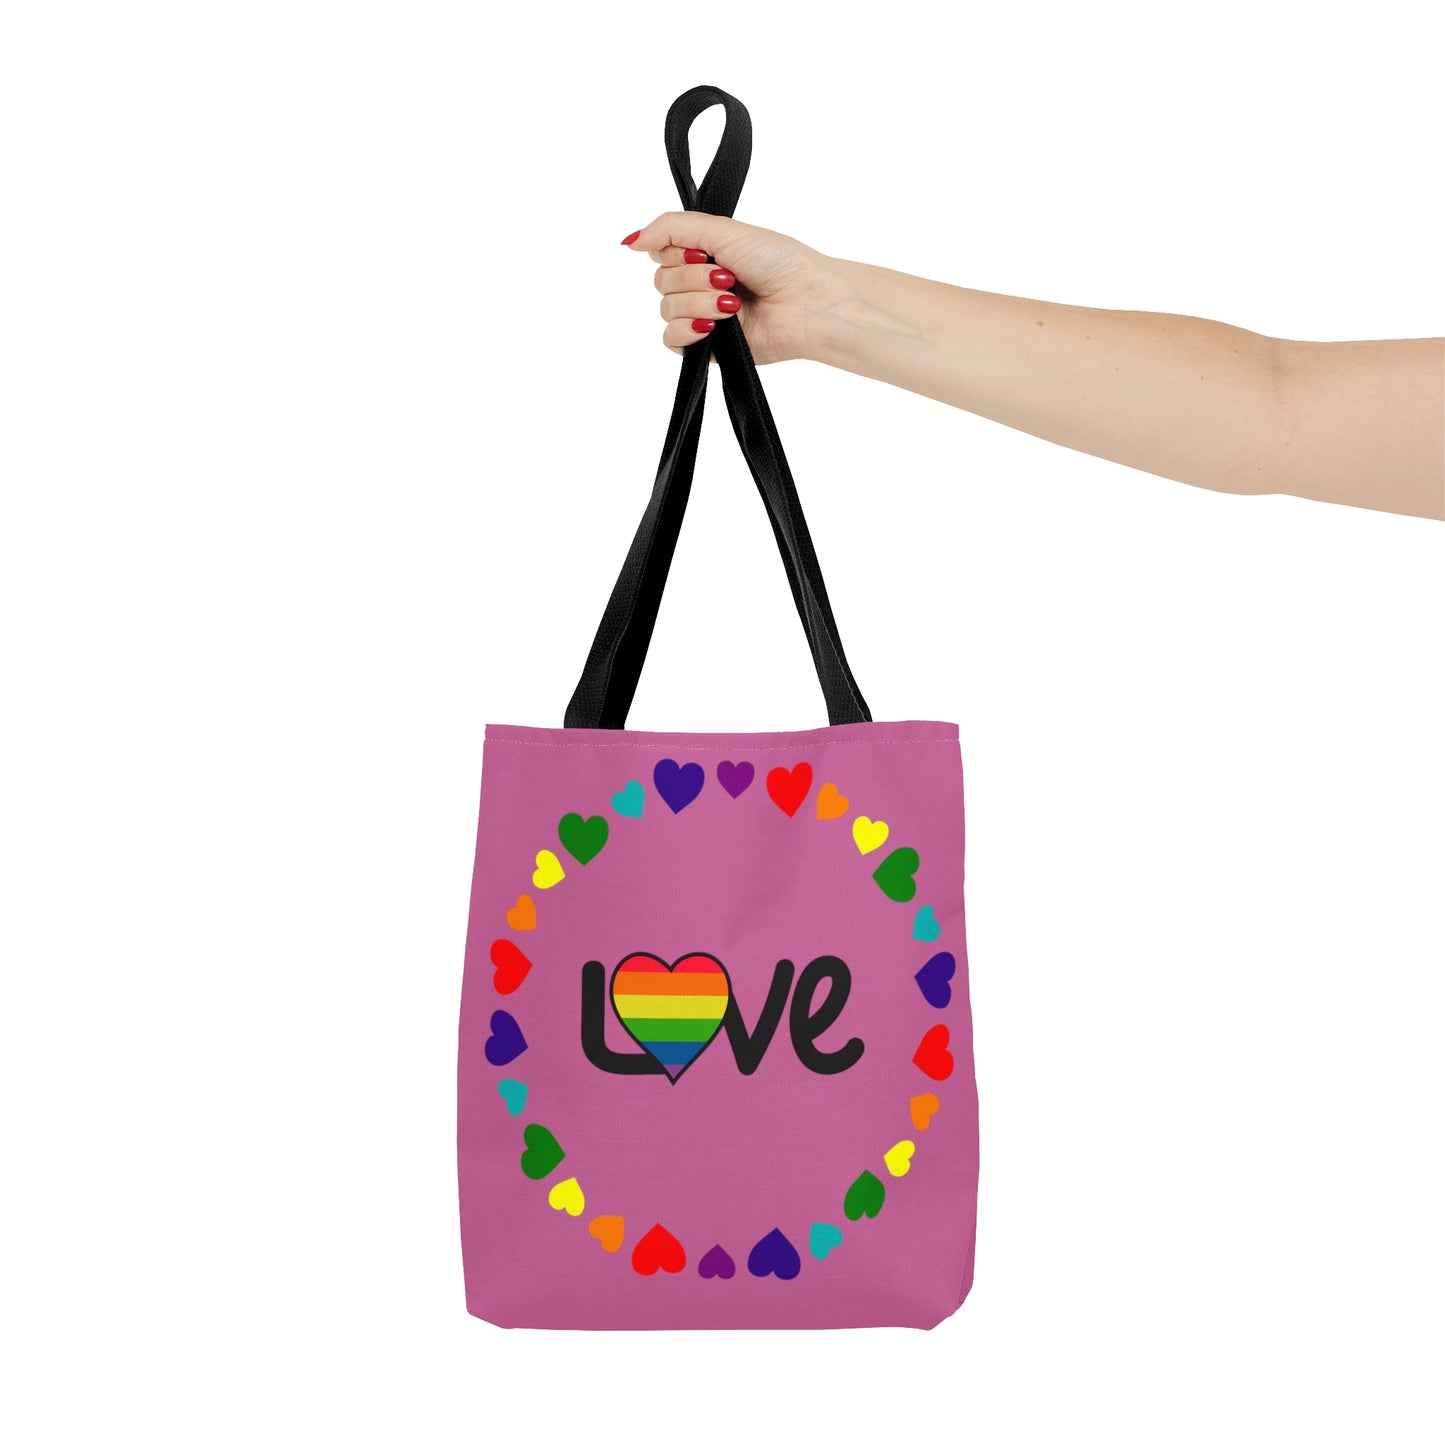 Celebrate love with this colorful Tote Bag in 3 sizes to meet your needs.